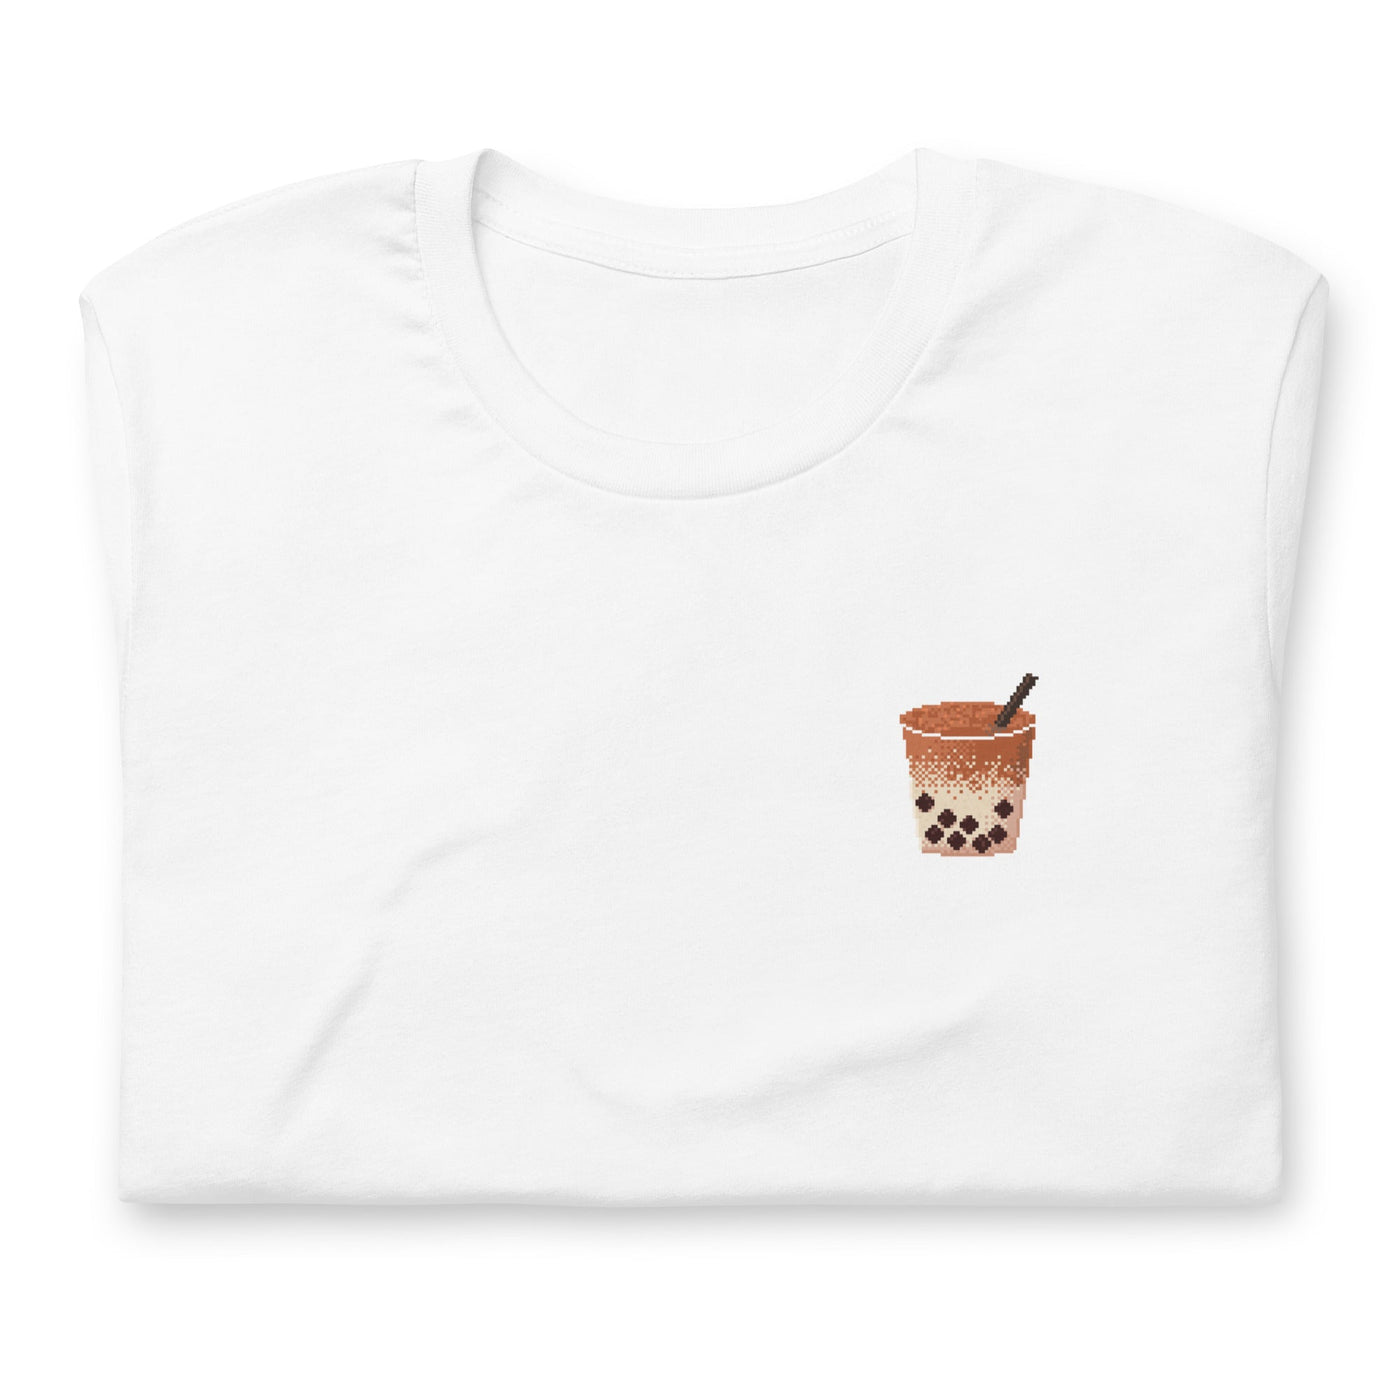 Pixel Boba | Unisex t-shirt | Cozy Gamer Threads and Thistles Inventory White XS 